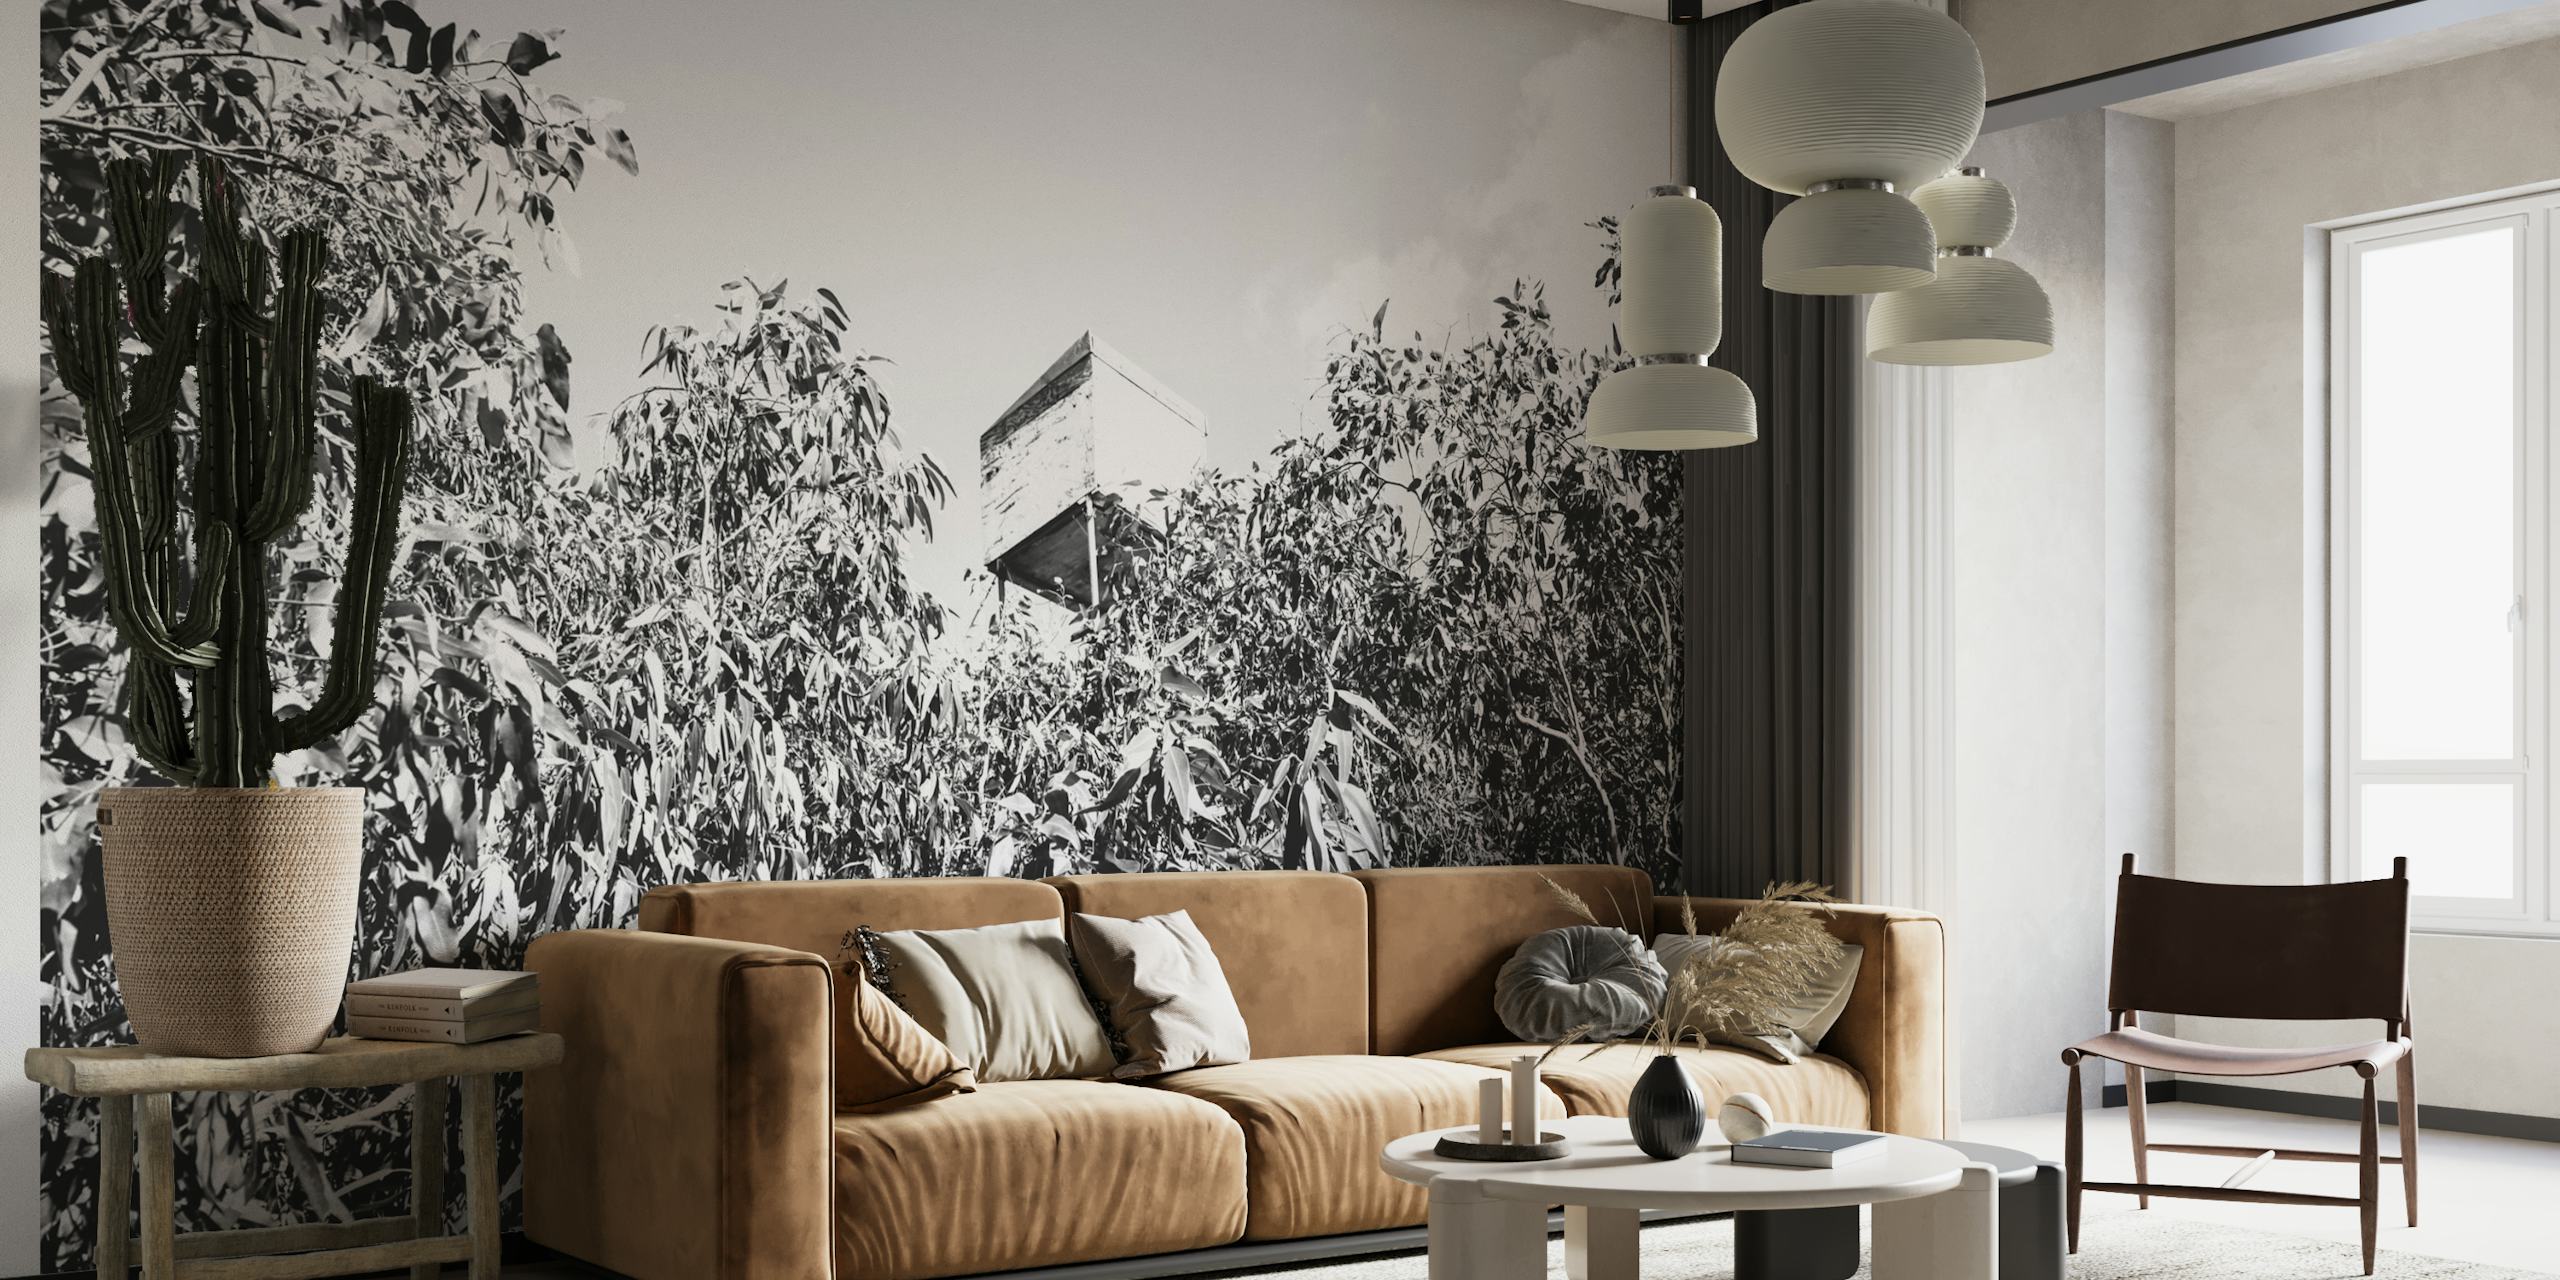 Black and white wall mural of a tree house amidst dense forest foliage